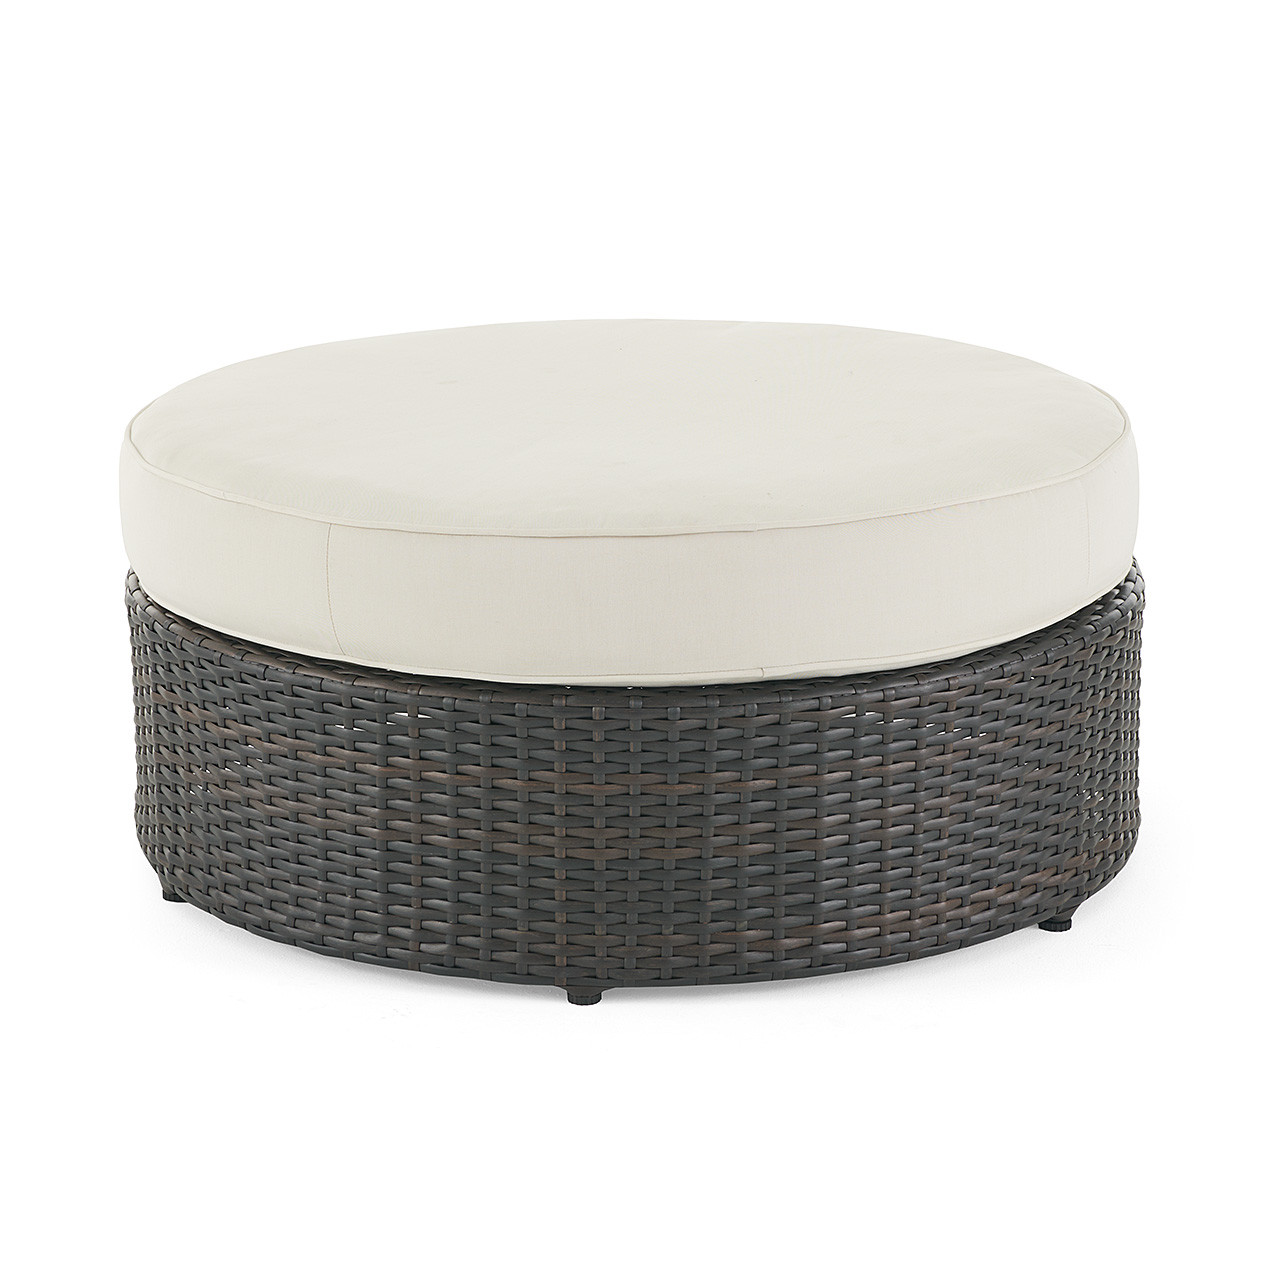 San Lucas Outdoor Wicker with Cushions 42 in. D Ottoman